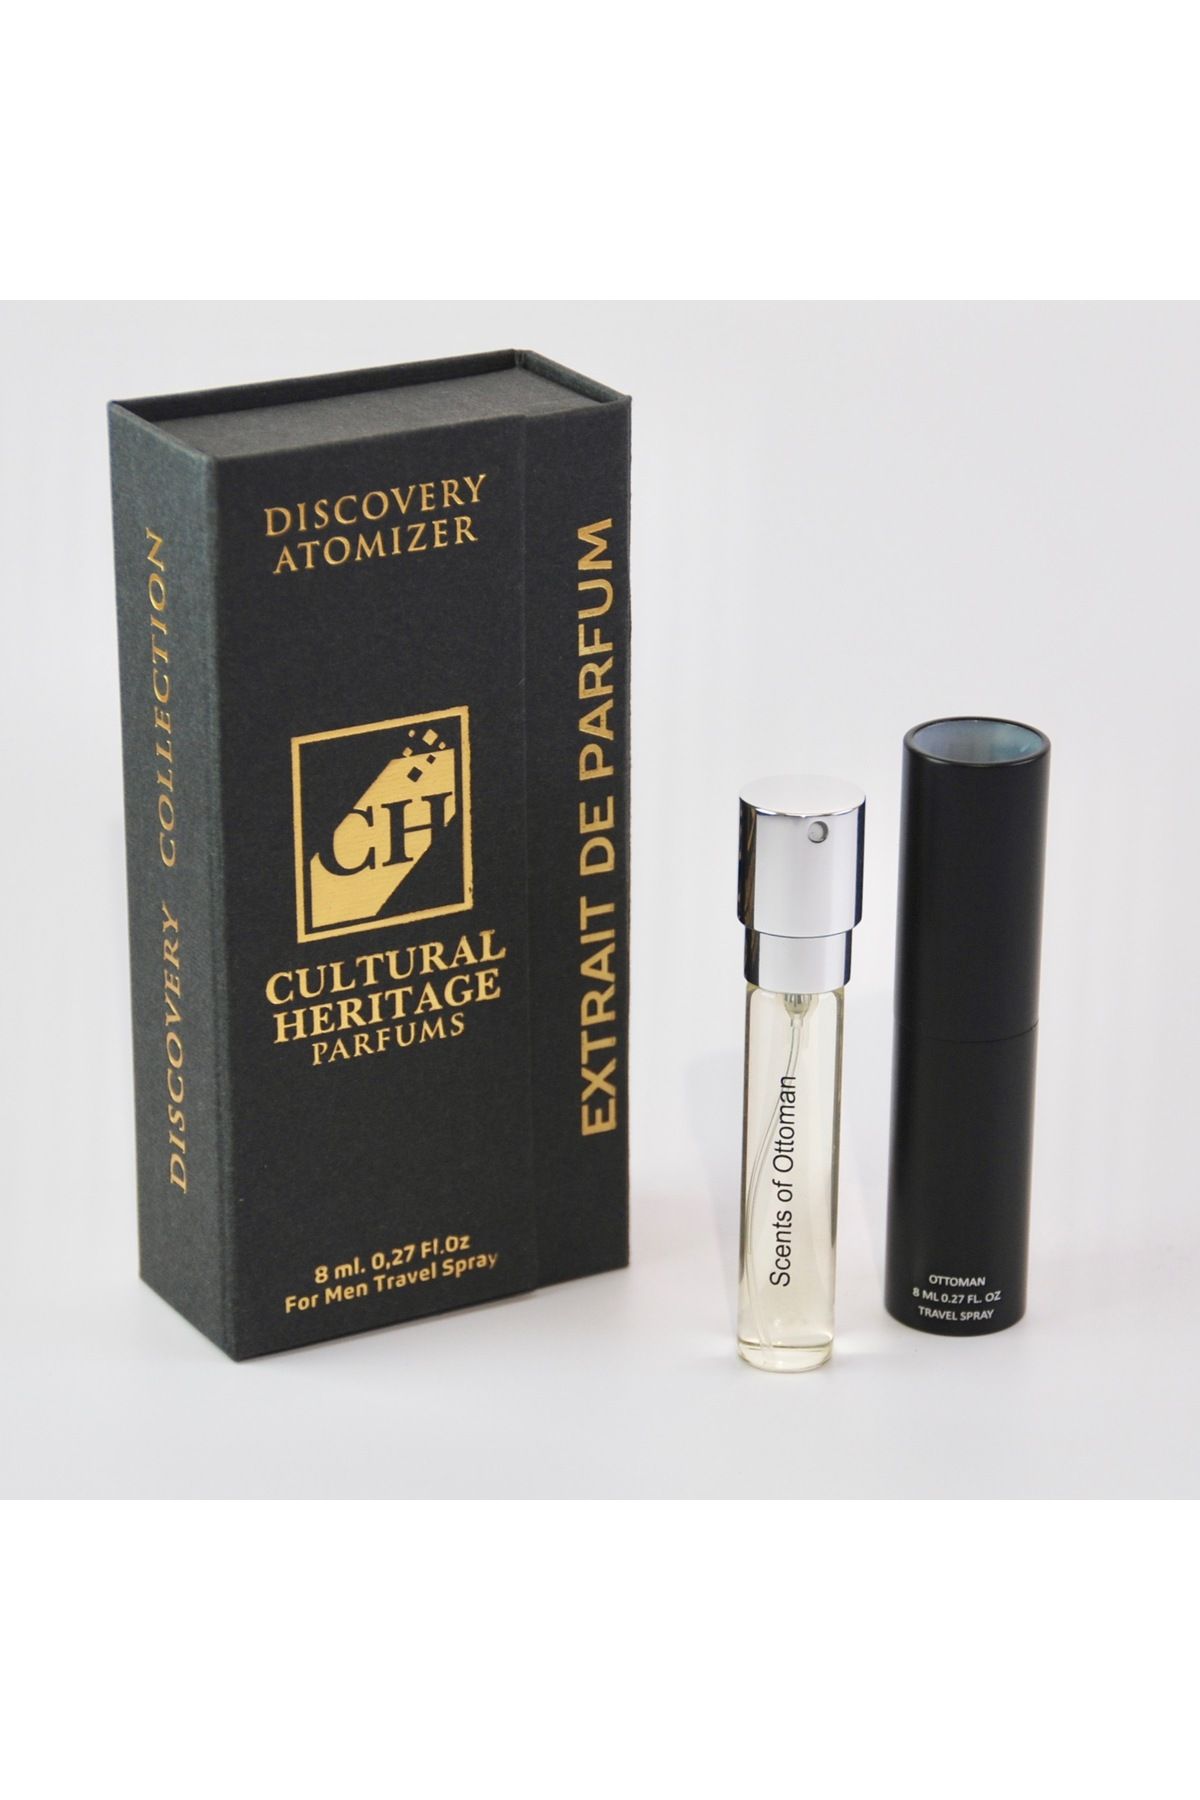 CH CULTURAL HERITAGE , Scents of Ottoman Discovery Atomizer Travel Spray , For Men,